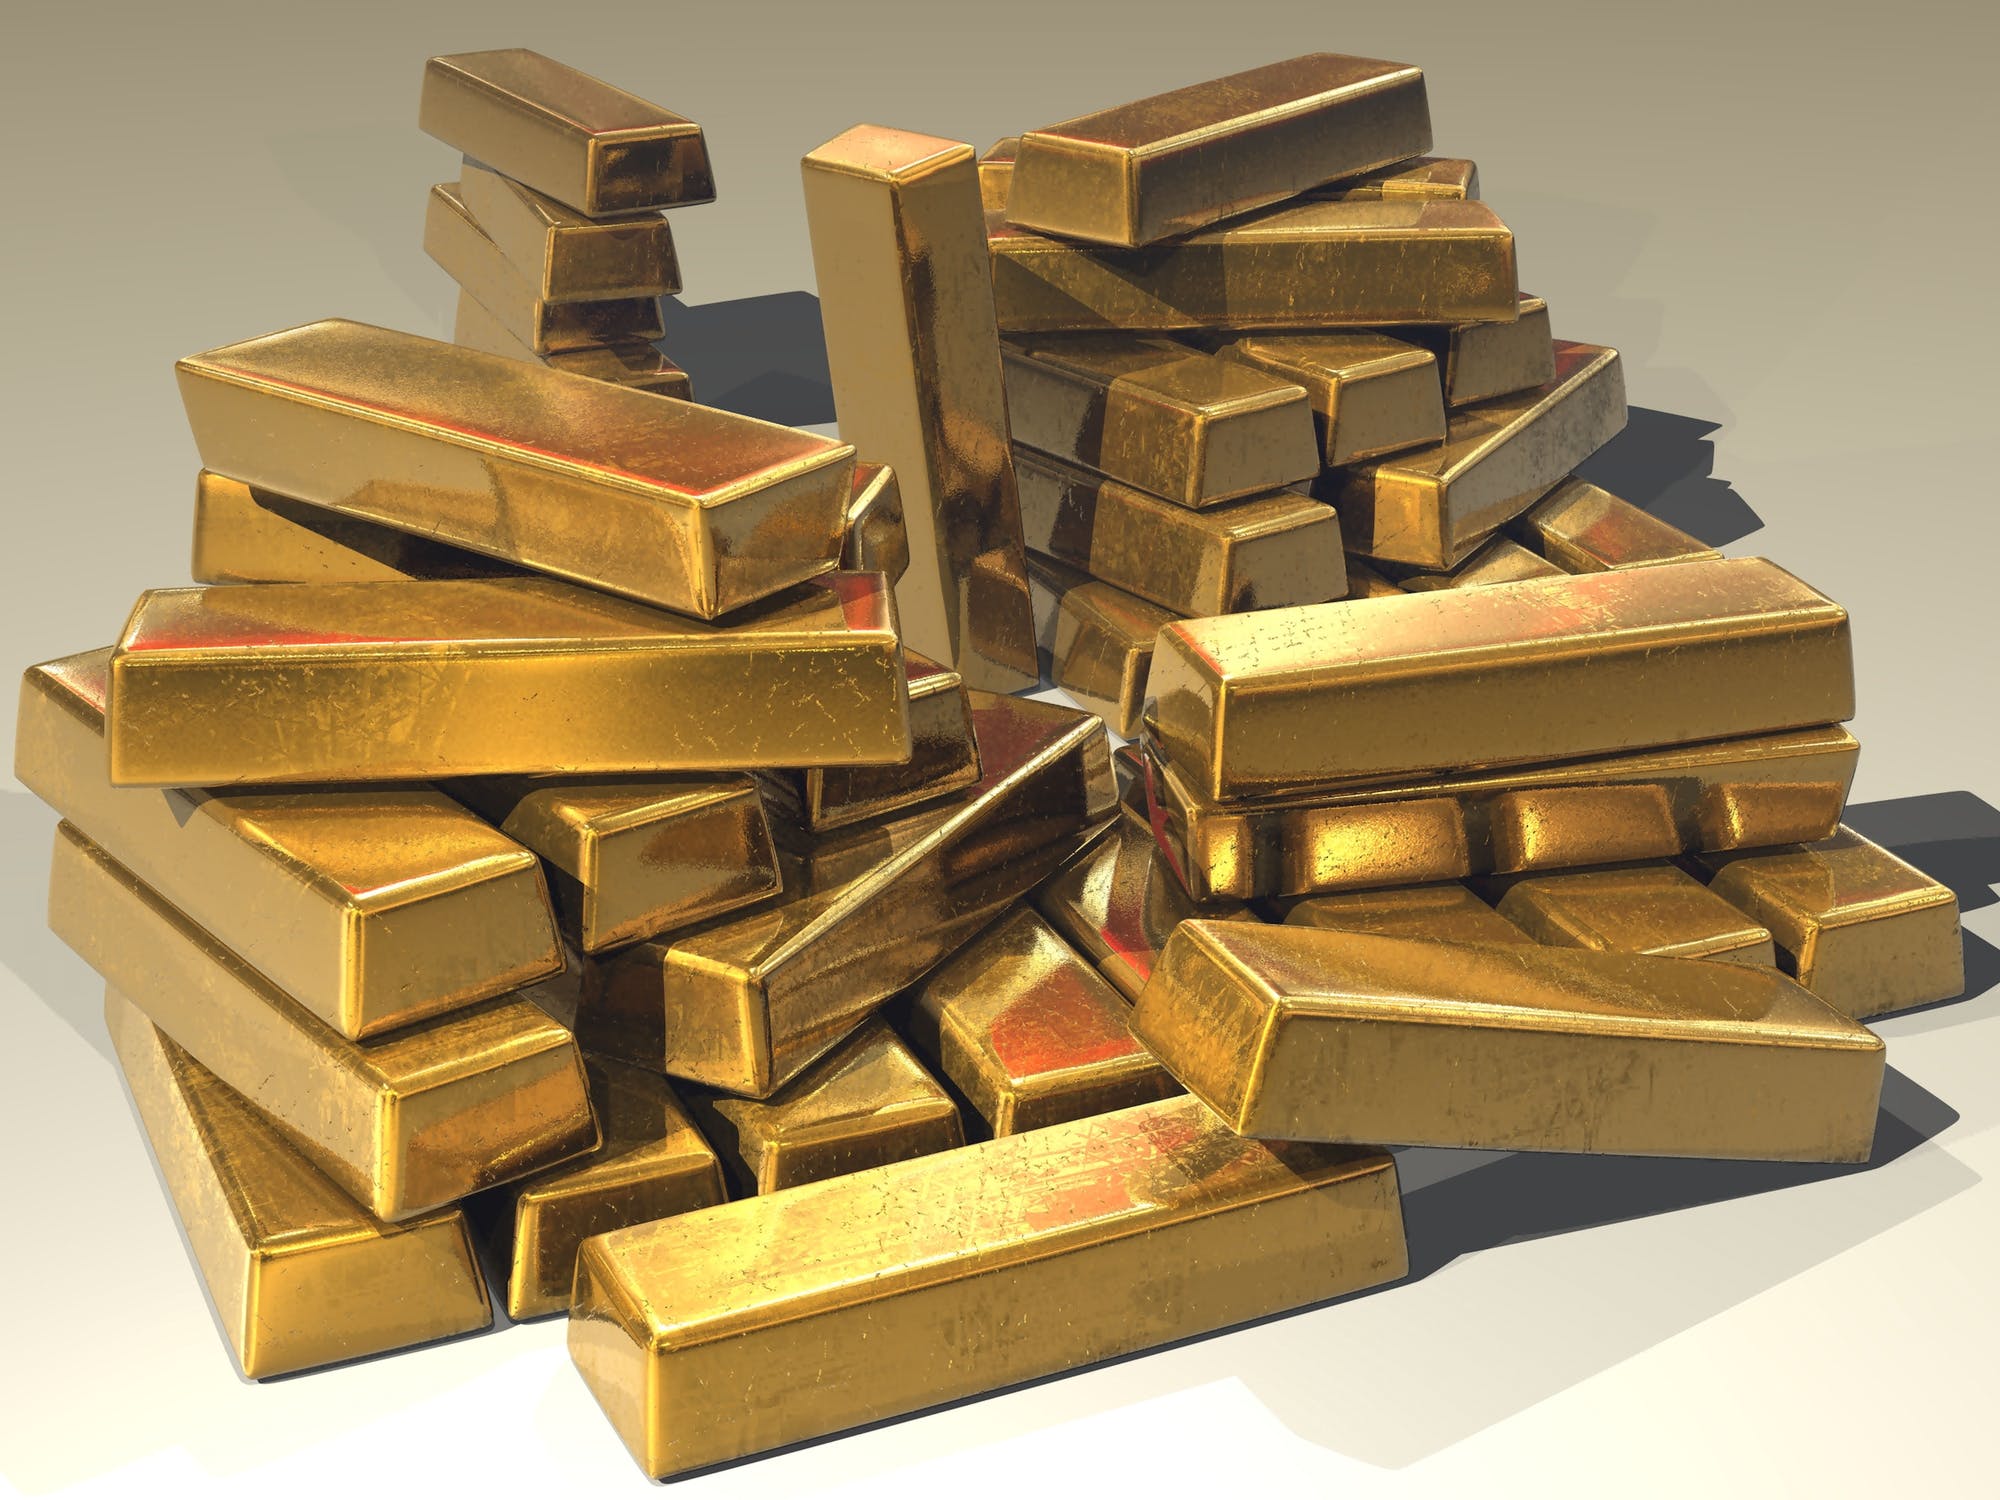 Global Investors Demand Gold As Protection Against Financial Repression